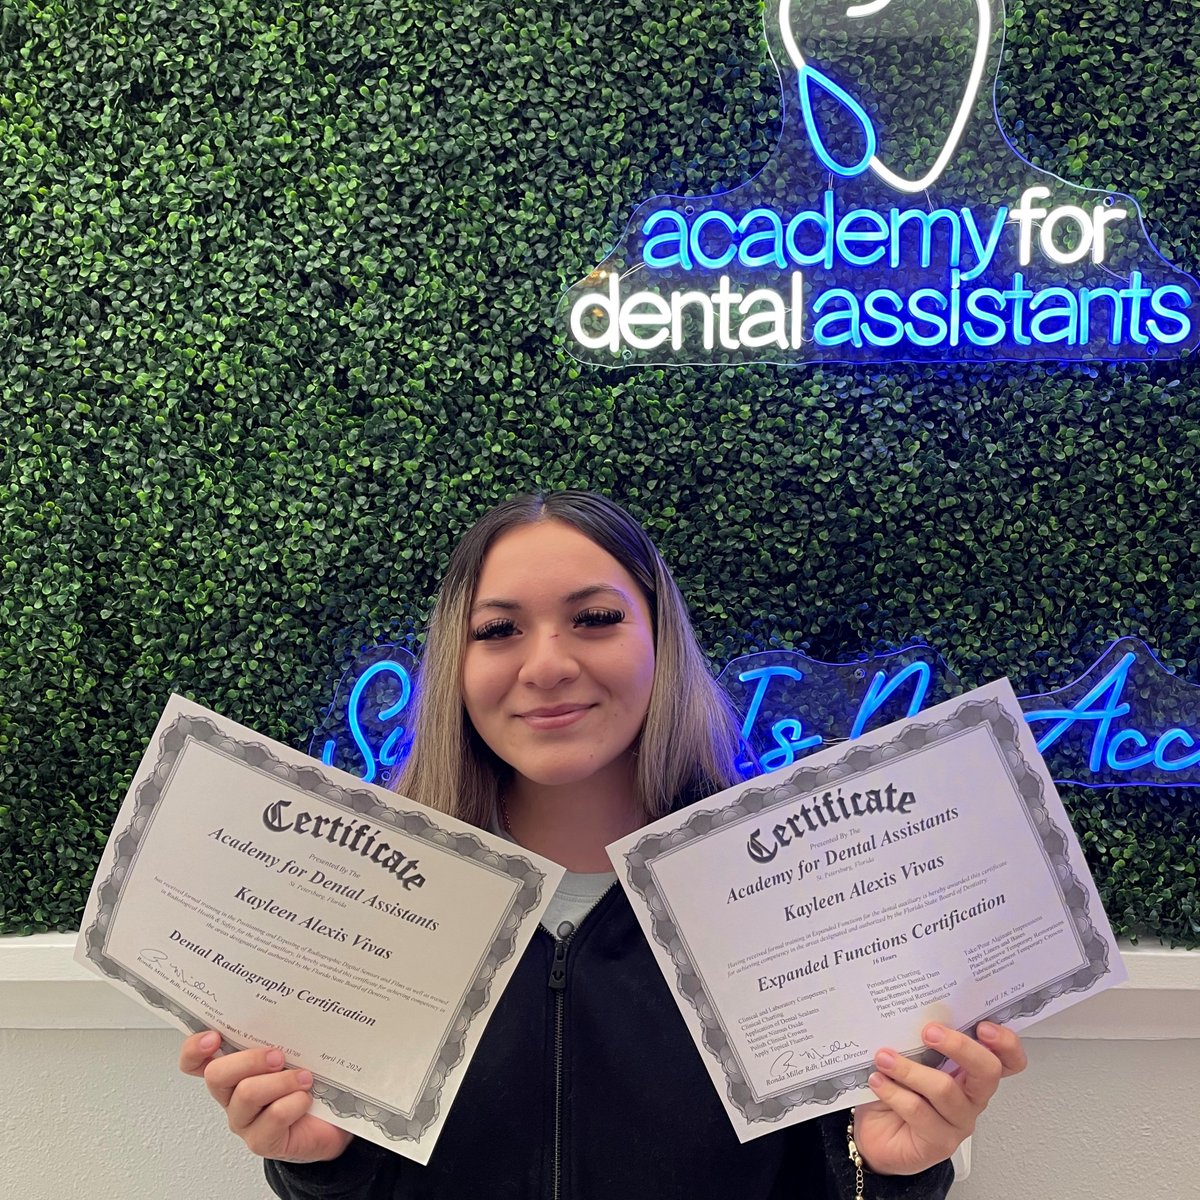 Congratulations on earning your Dental Assisting certifications! We are so proud of you.
#a4da #academy4da #academyfordentalassistants #dacertifications